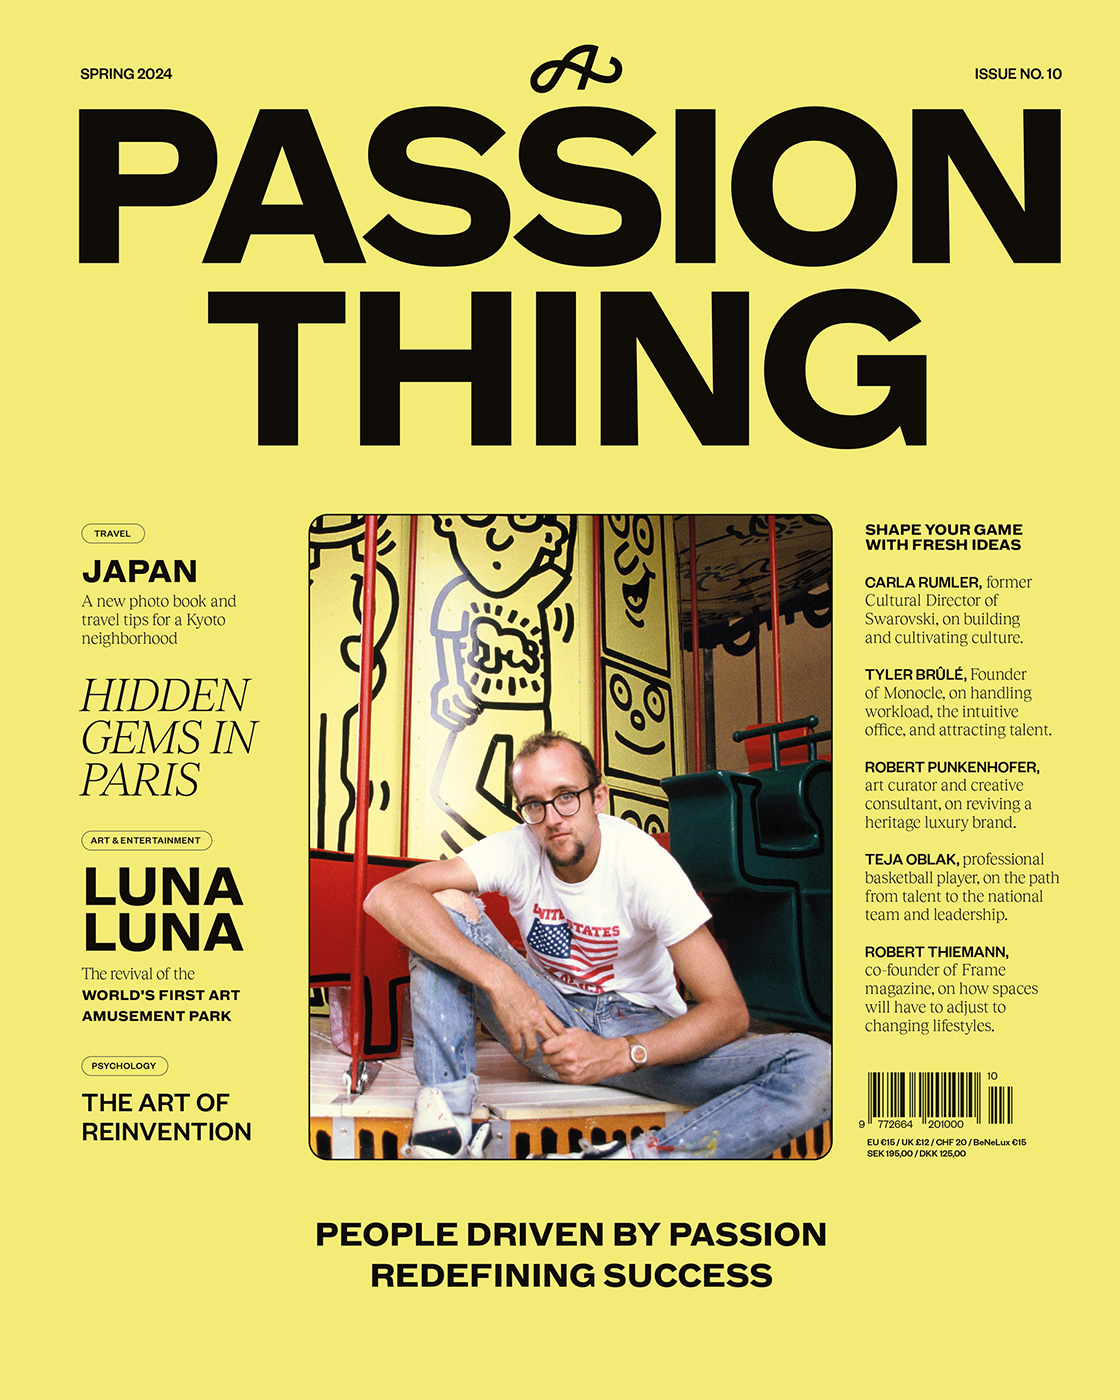 A PASSION THING Issue No. 10